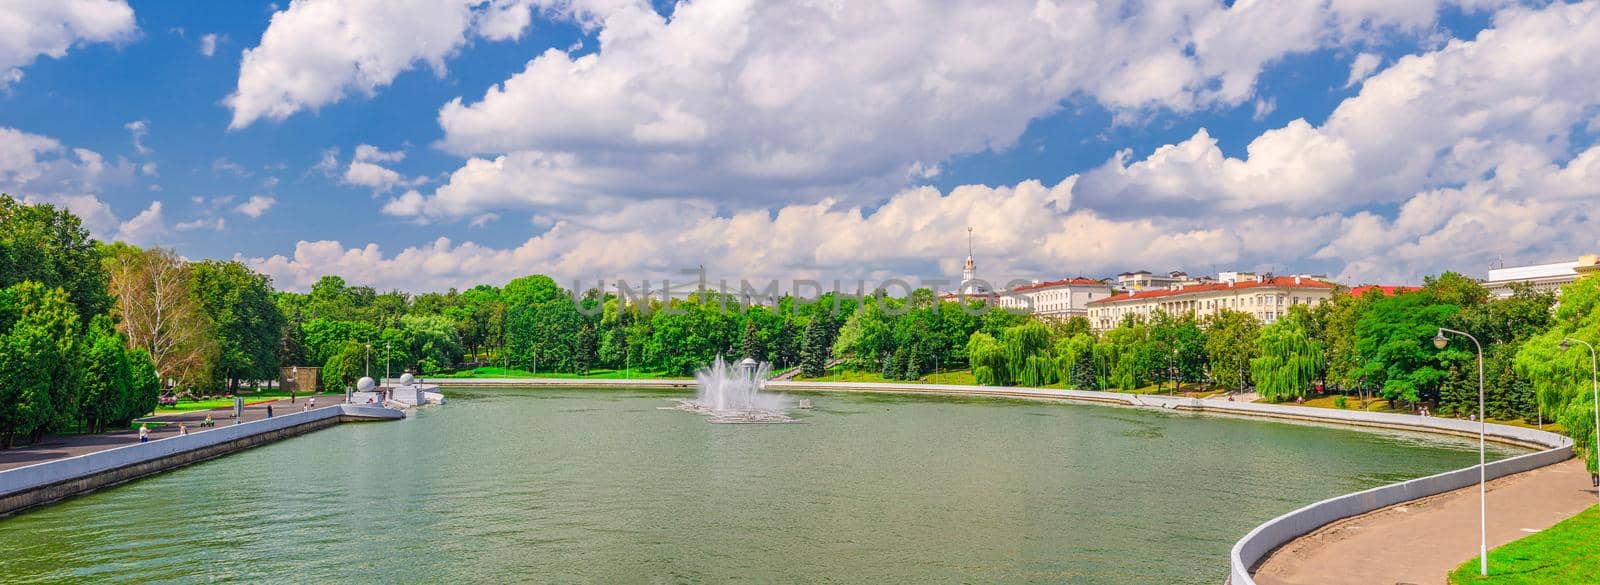 Panorama of Minsk cityscape with Svislach Svislac river embankment Janka Kupala Park and General Headquarters building in historical centre blue sky white clouds, Republic of Belarus